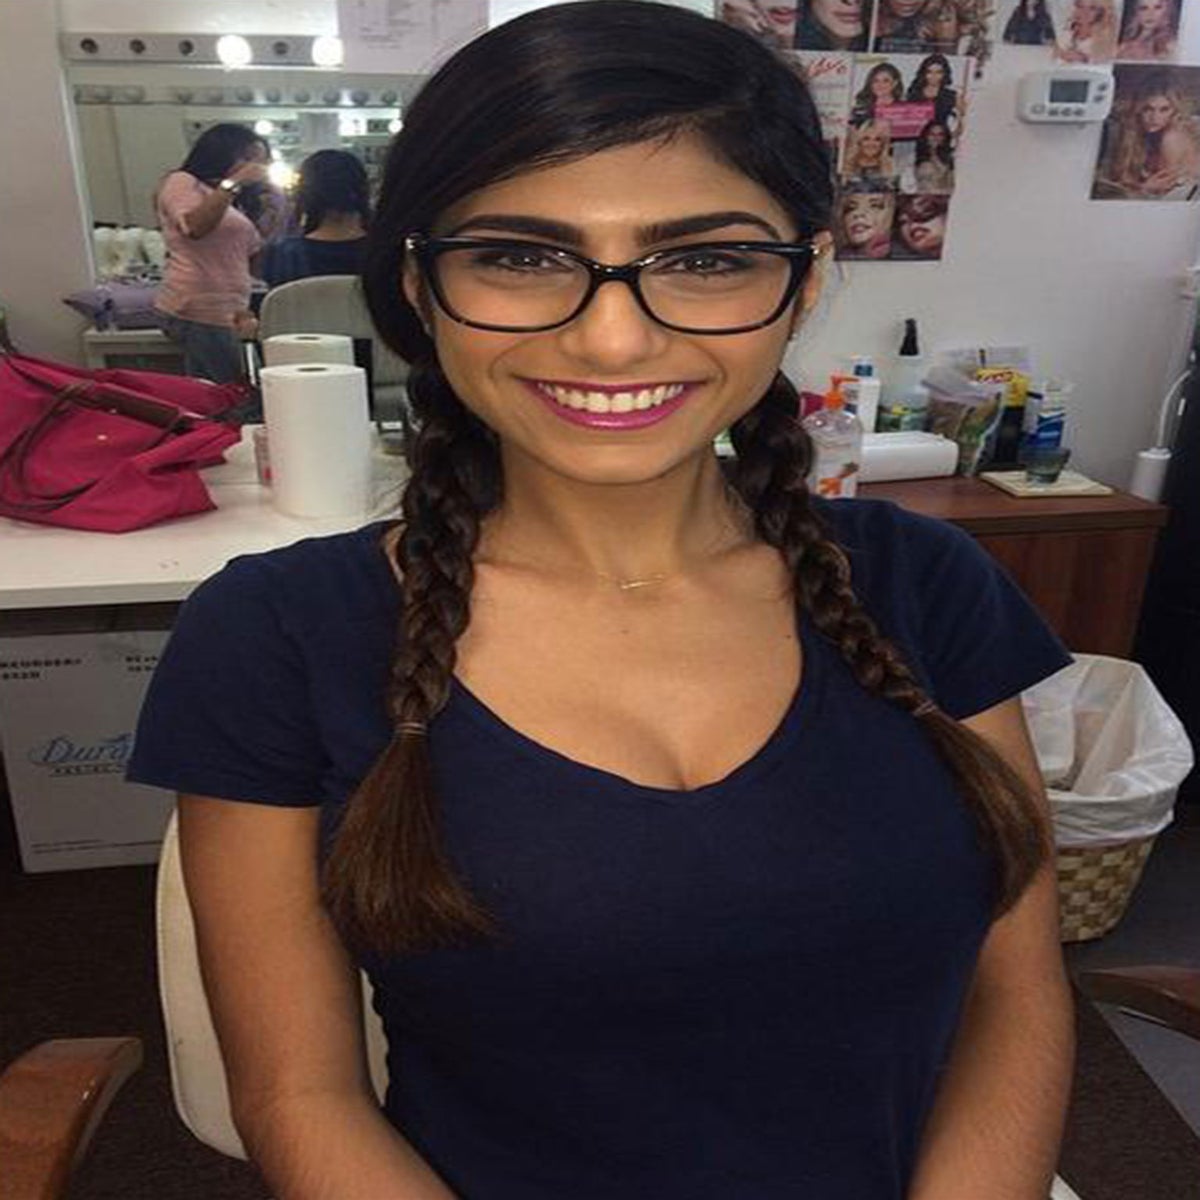 Lebanese Porn Star - Pornhub star Mia Khalifa receives death threats after being ranked the  site's top adult actress | The Independent | The Independent